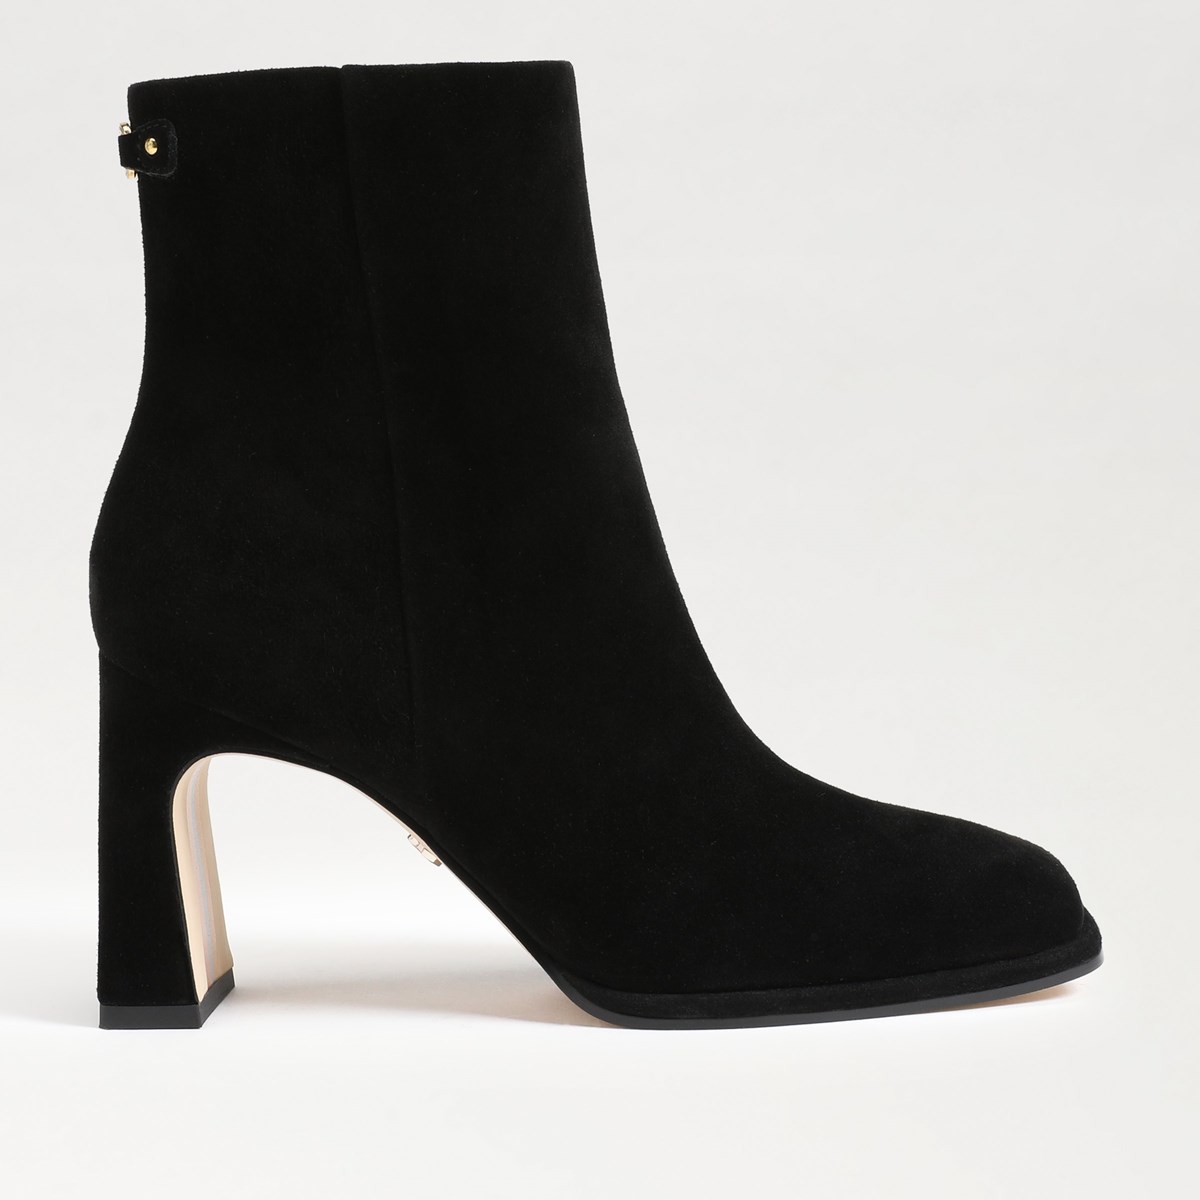 Sam Edelman Irie Square Toe Ankle Bootie | Women's Boots and Booties